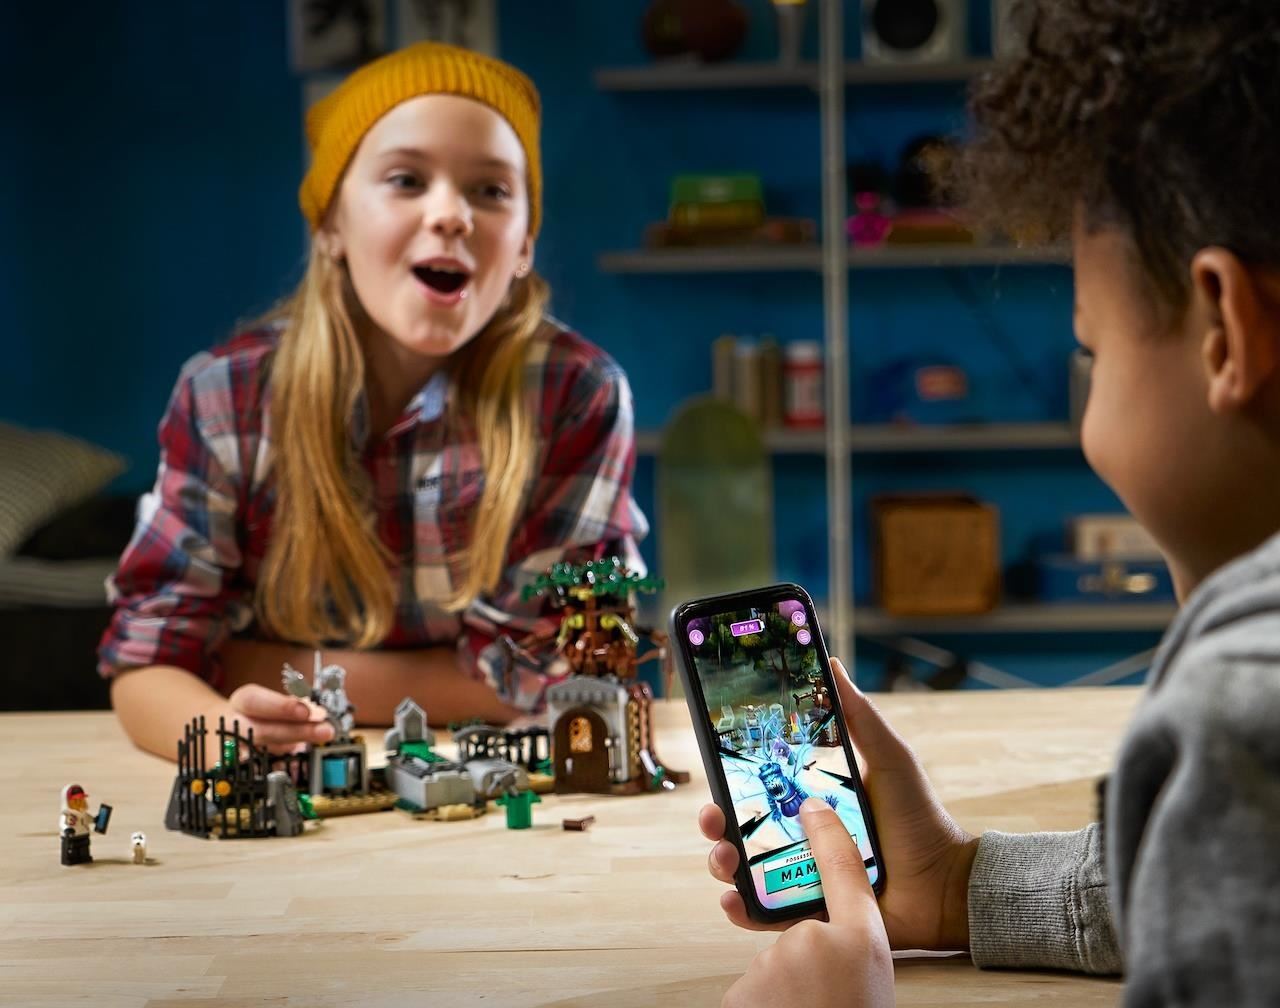 Lego's Newest Playsets Transform Normal Toys into Augmented Reality Experiences Across Platforms